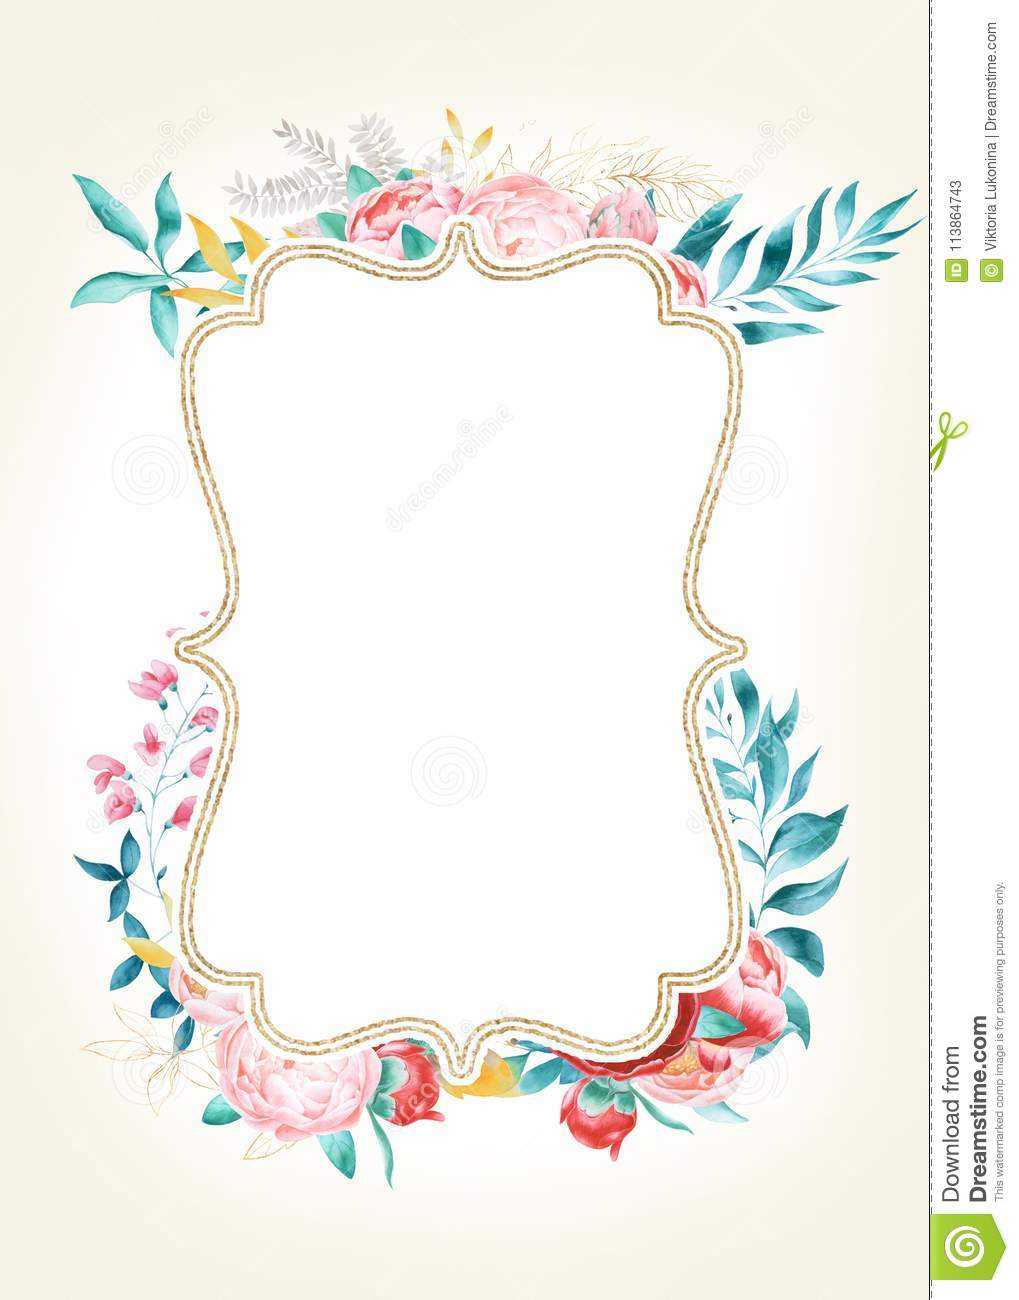 Card Template With Watercolor Peonies. Stock Illustration Throughout Blank Templates For Invitations